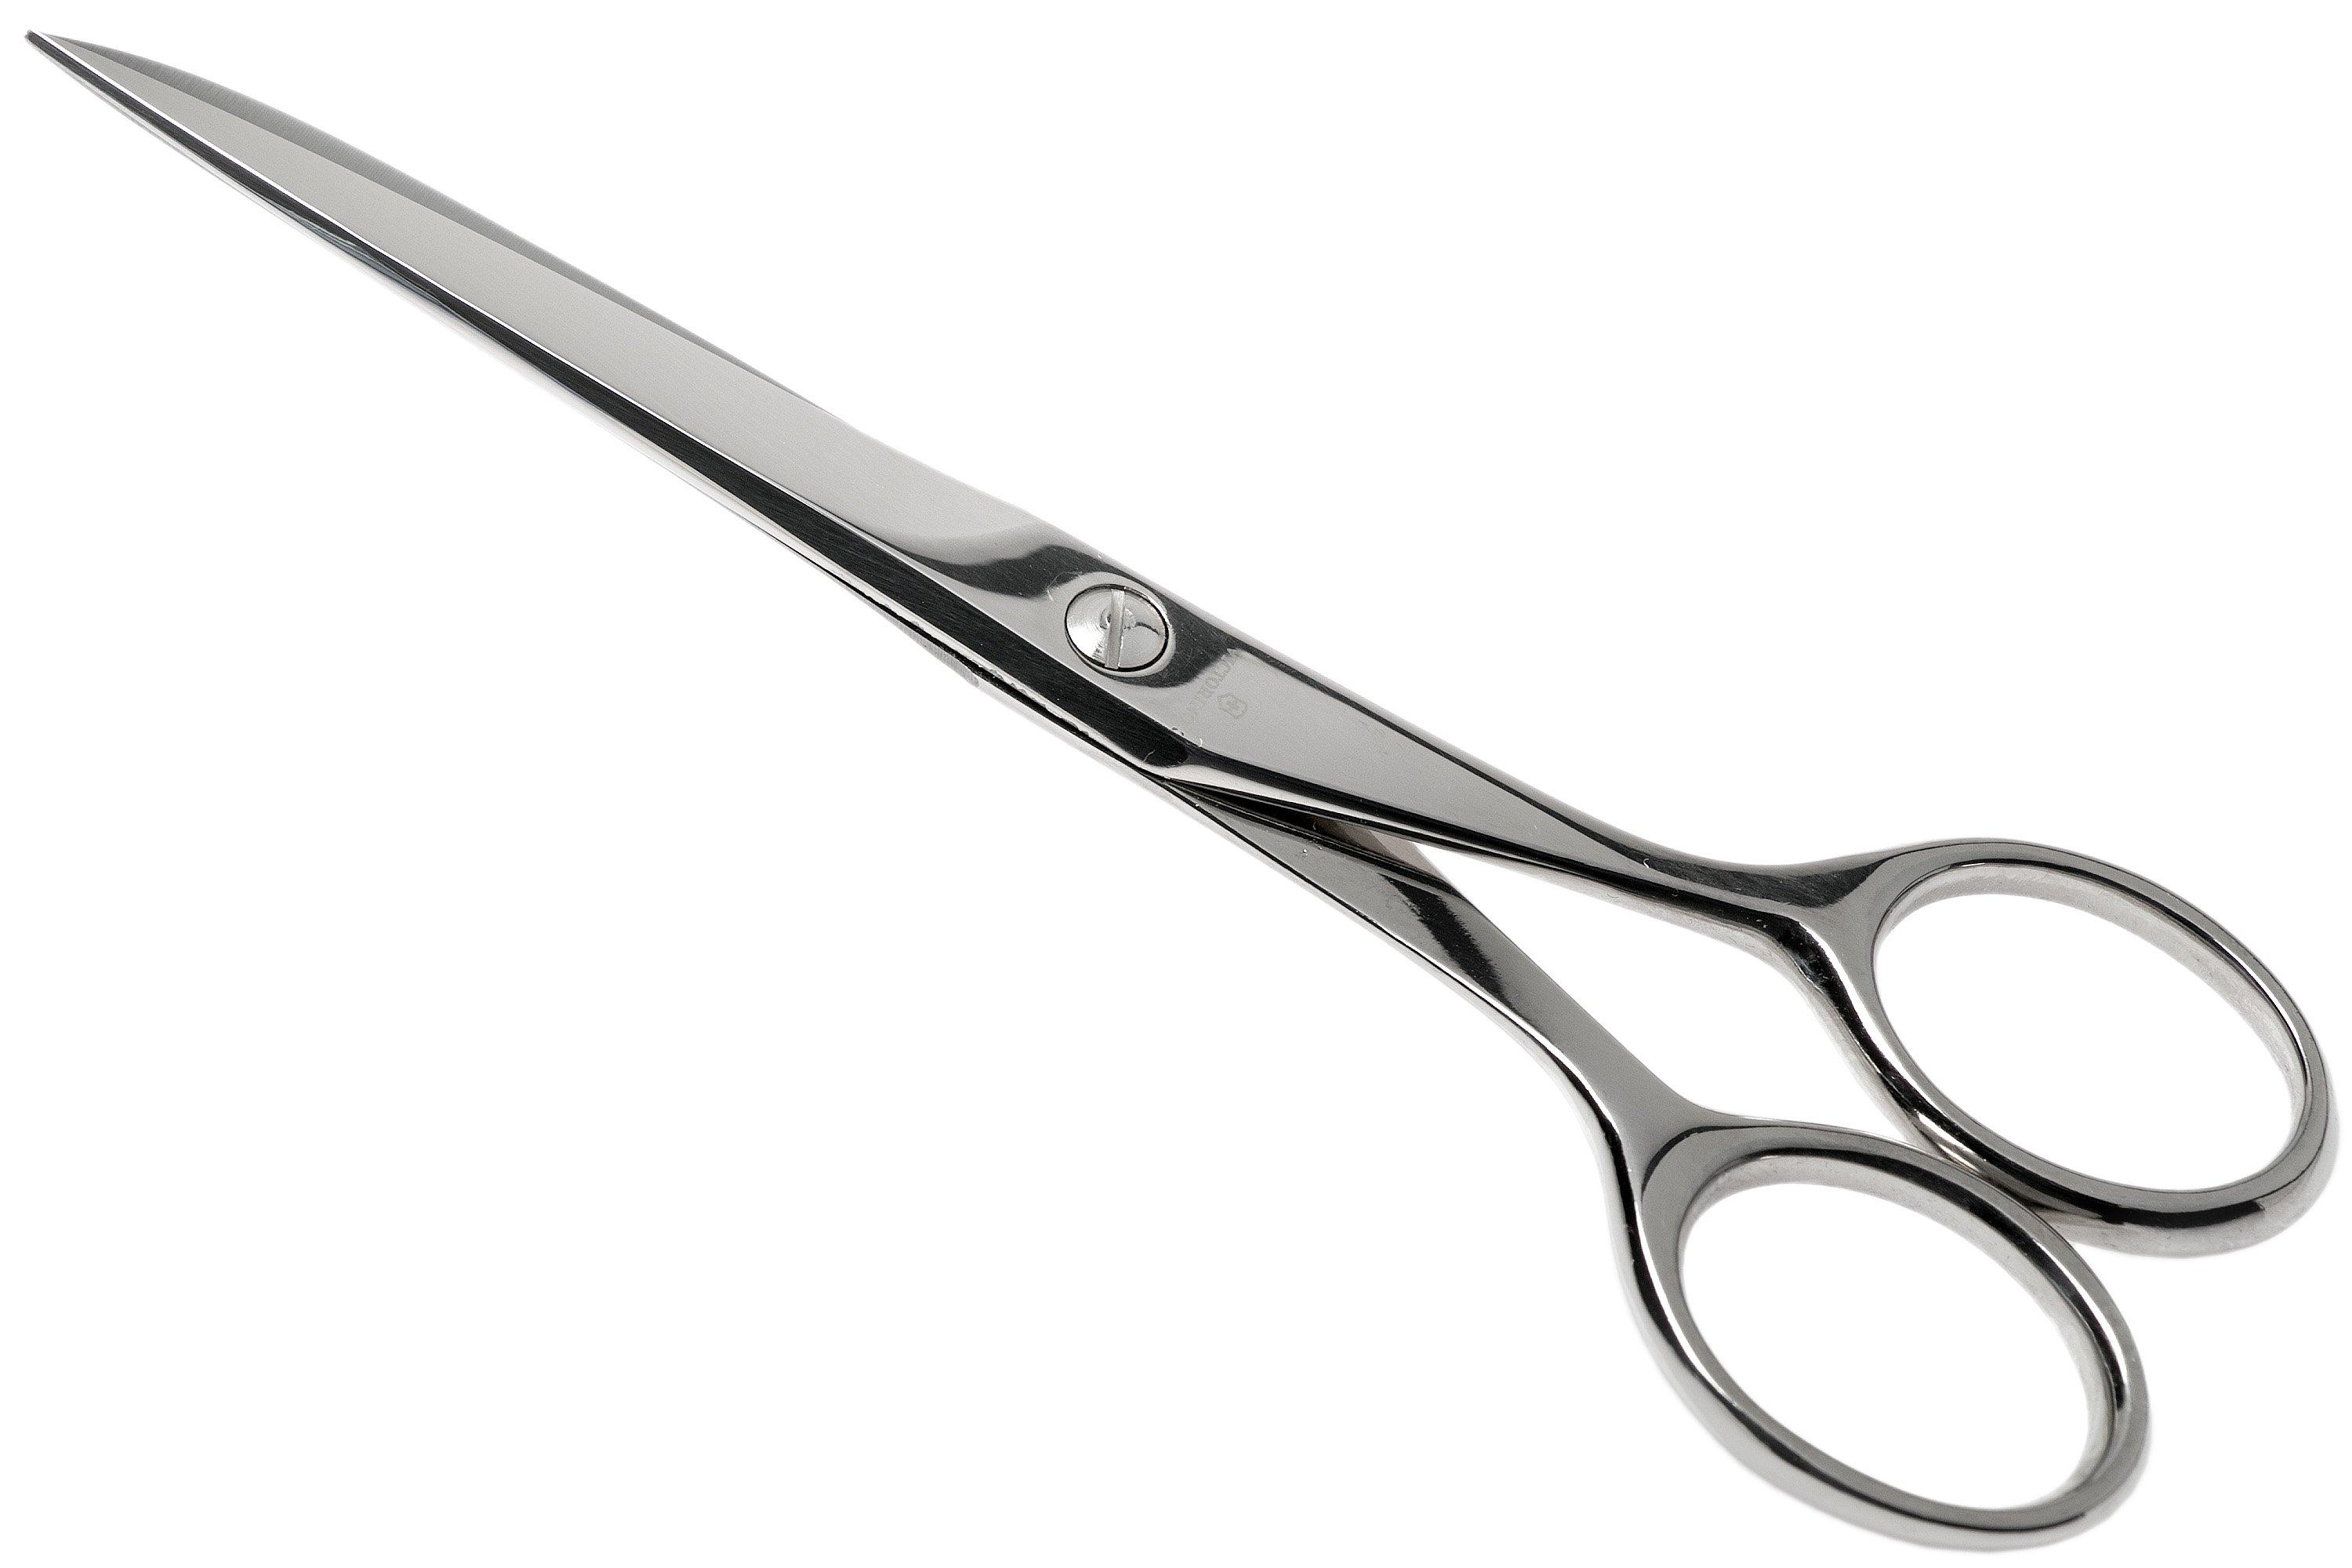 Victorinox Sweden shopping cm household scissors Advantageously | 15 8.1016.15, at